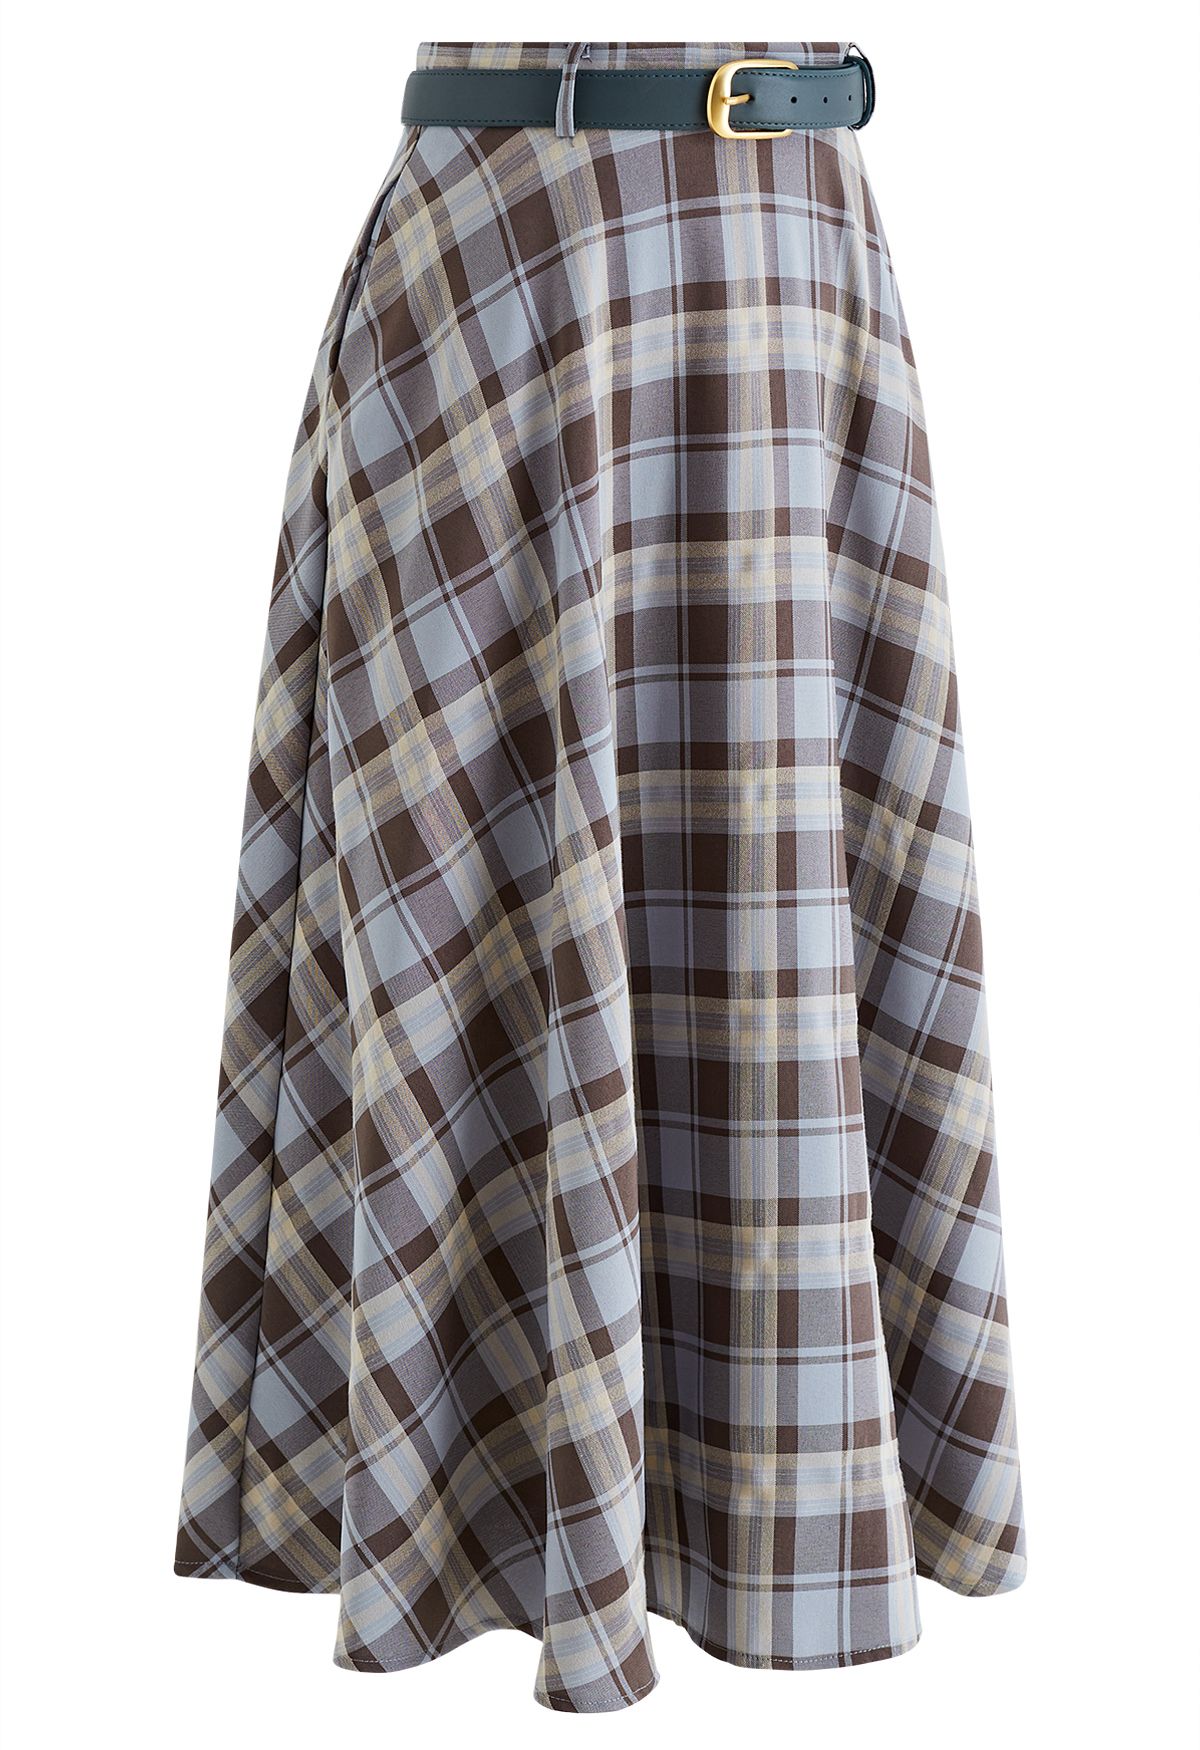 Vintage Belted Plaid Midi Skirt in Dusty Blue